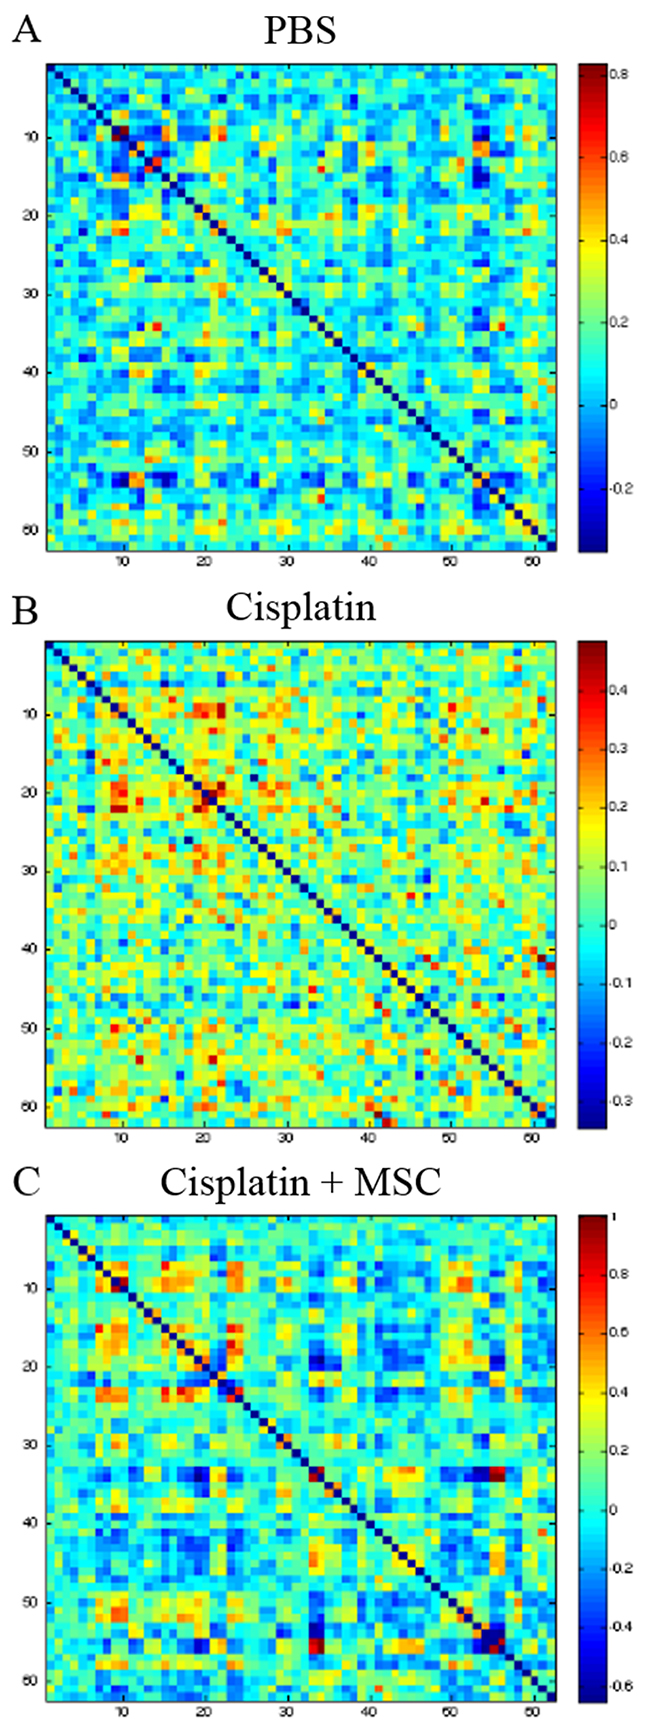 Effect of cisplatin and MSC on brain functional connectivity.